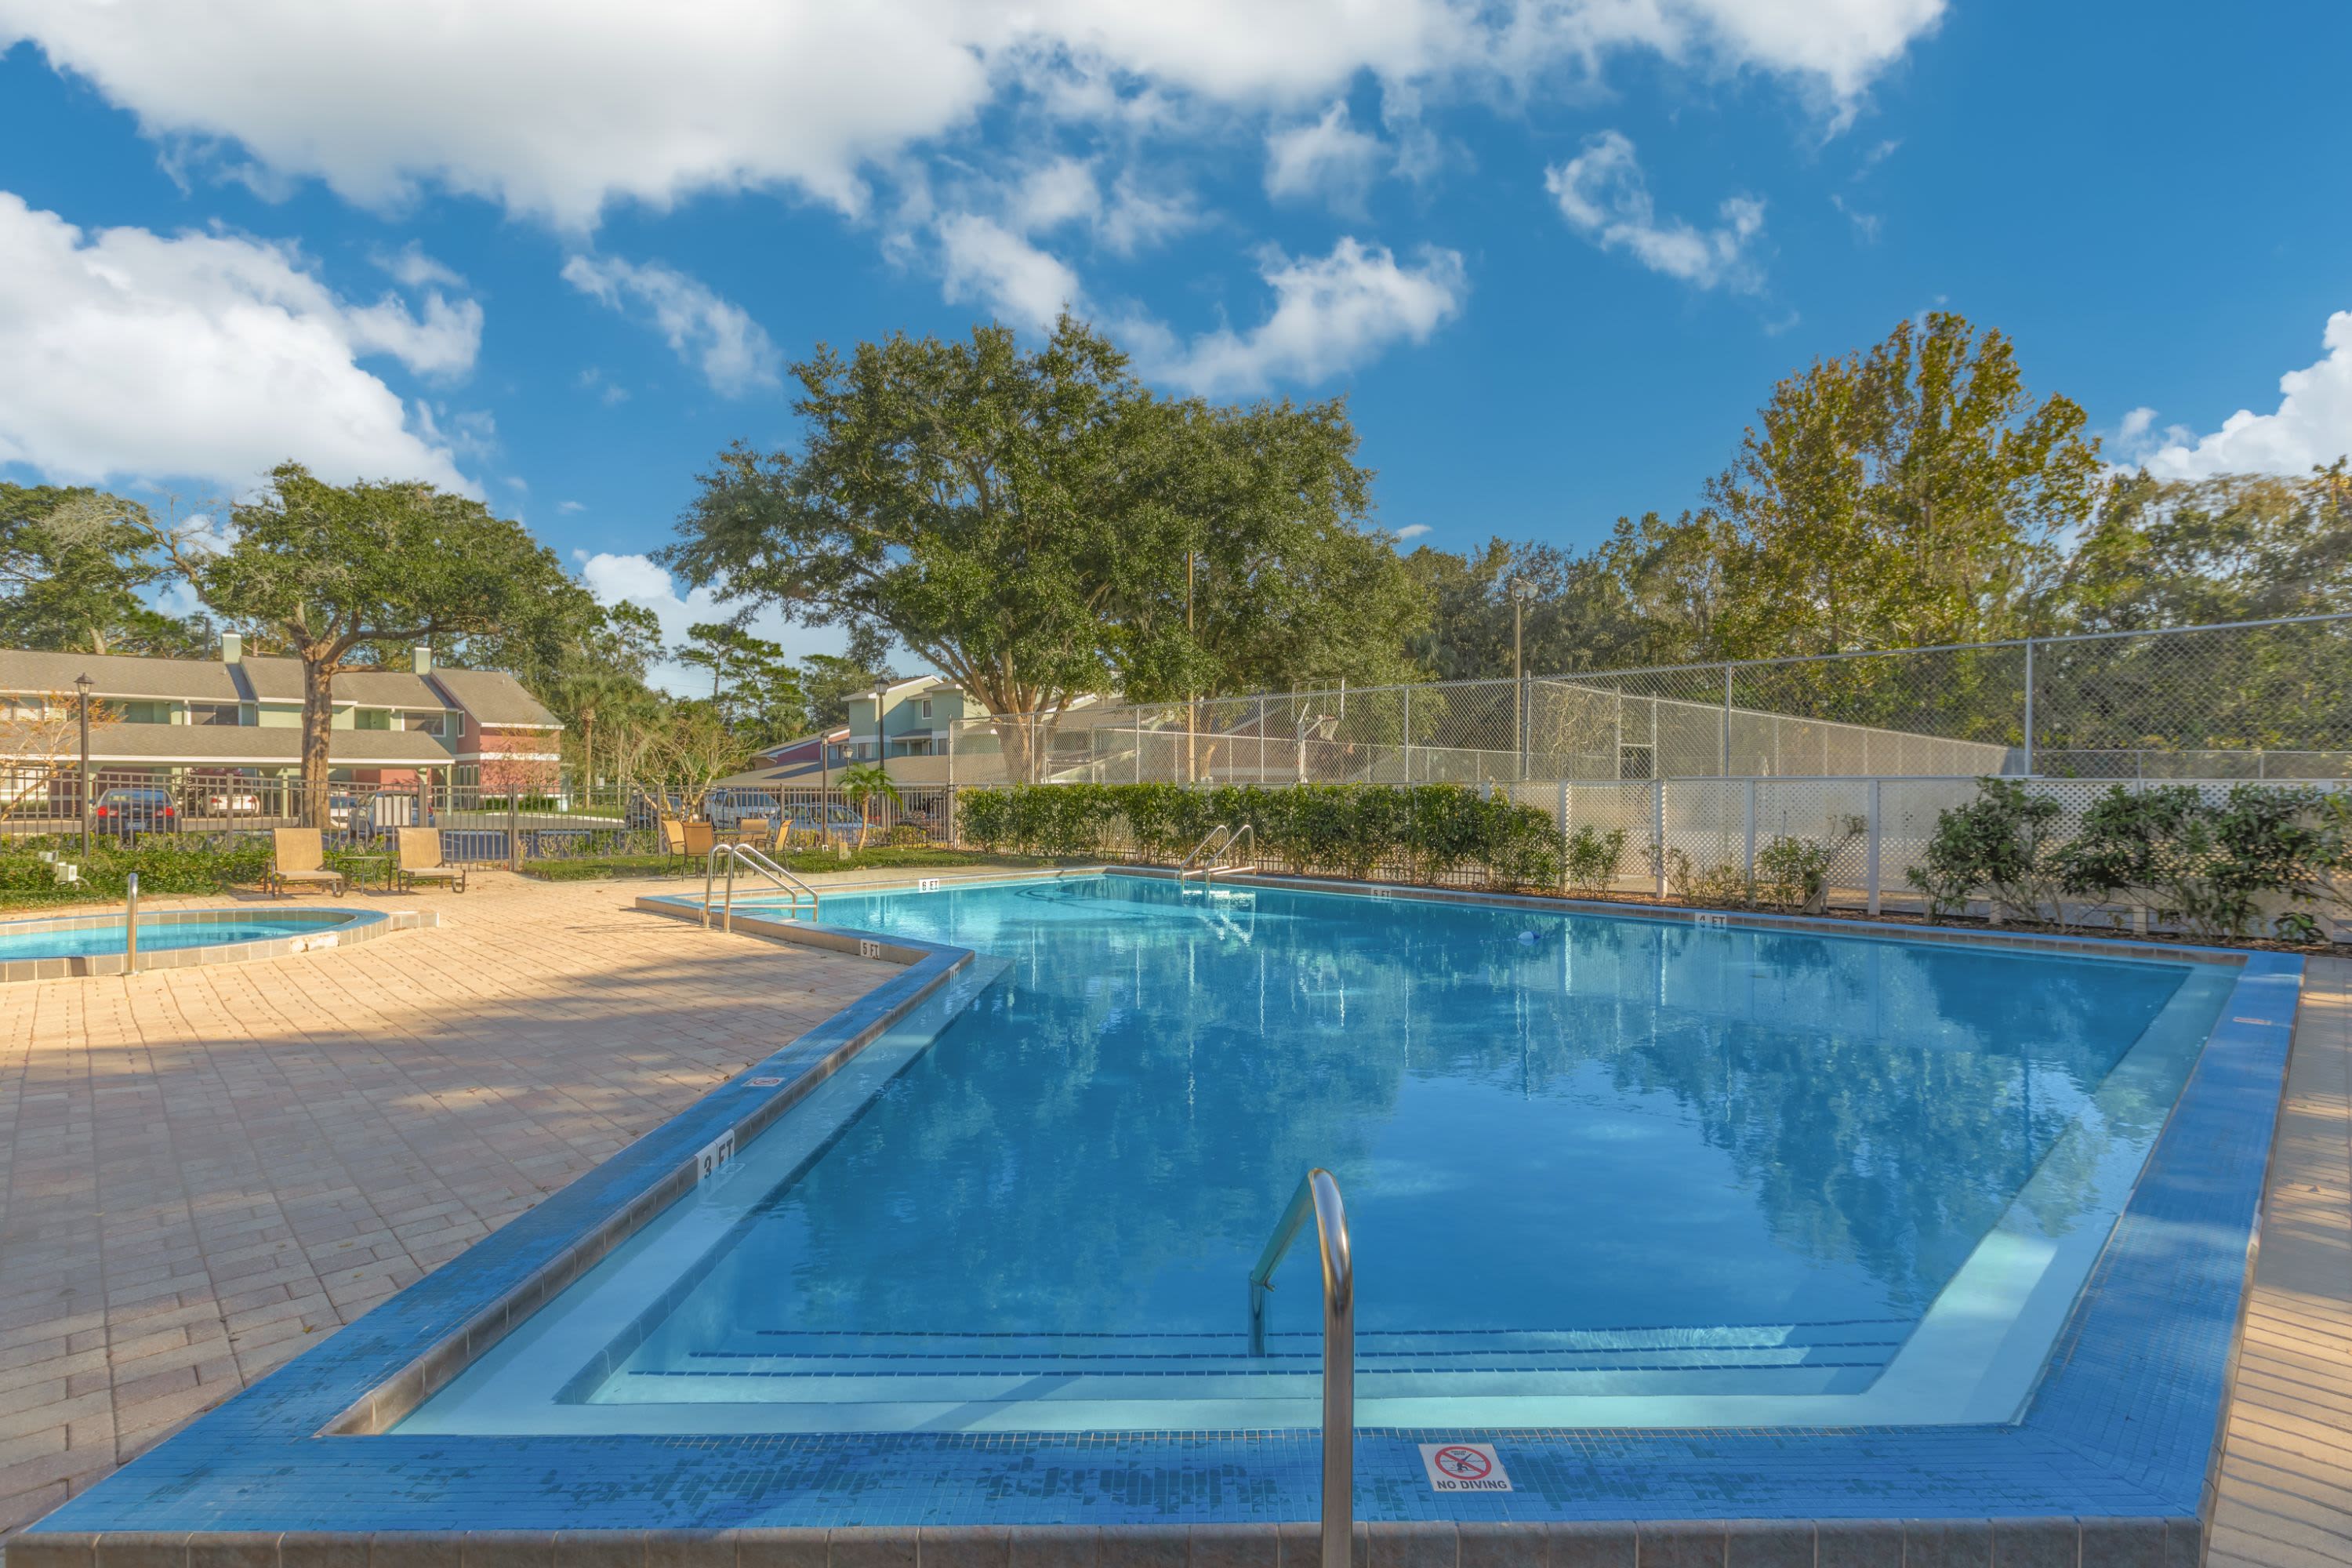 View amenities like our swimming pool at Stone Creek at Wekiva in Altamonte Springs, Florida